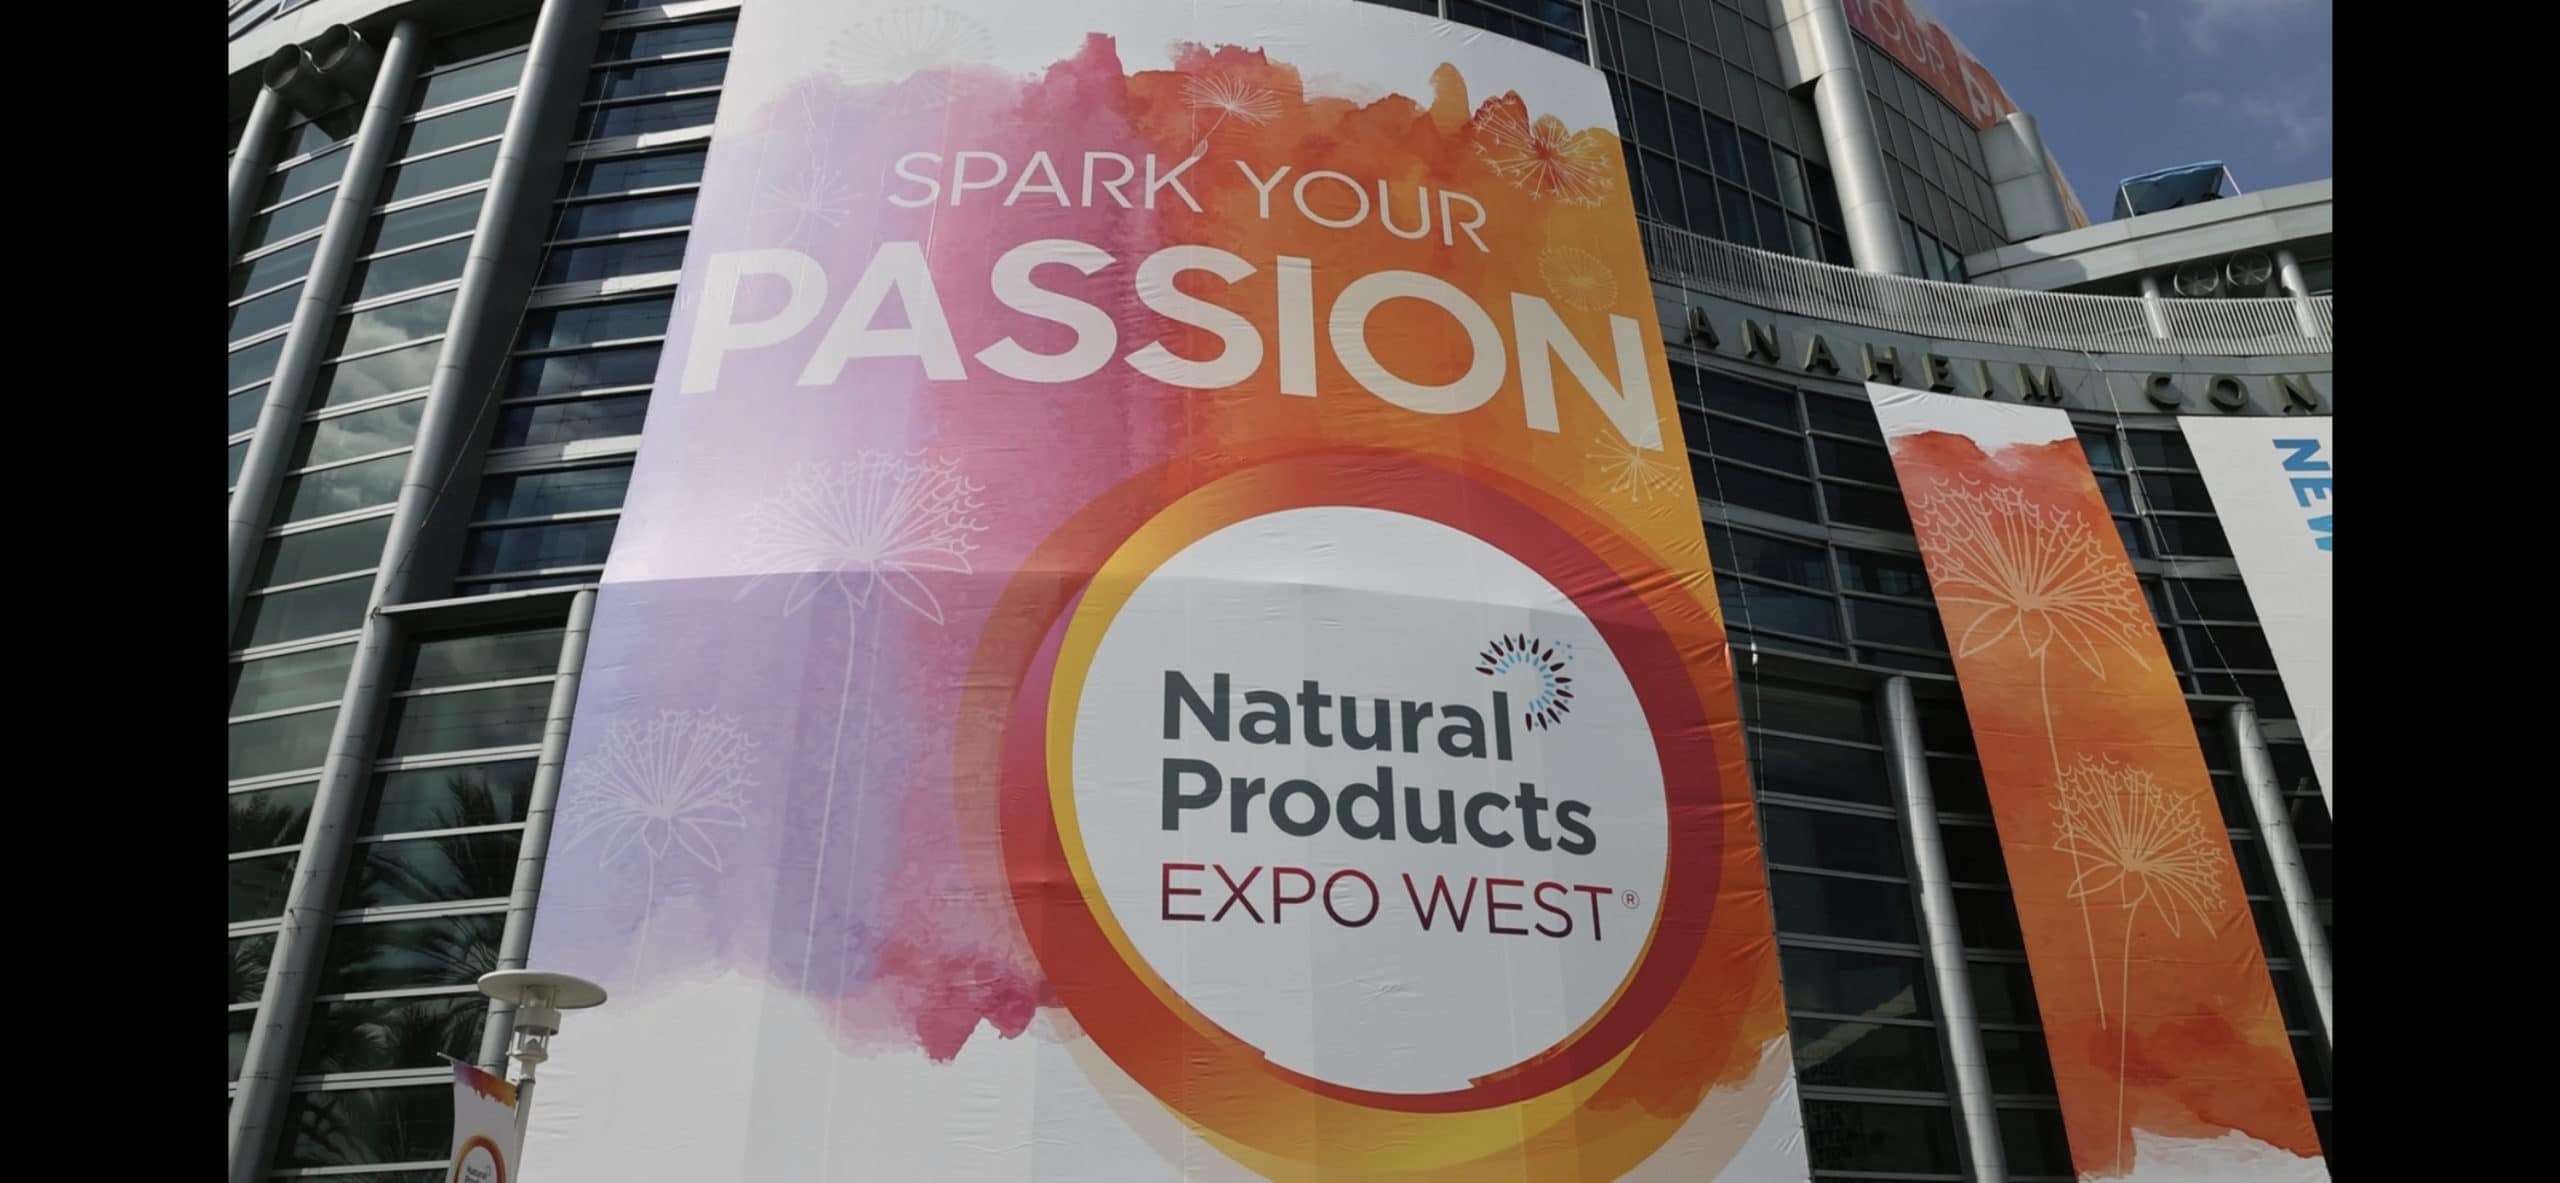 natural products expo west spark your passion